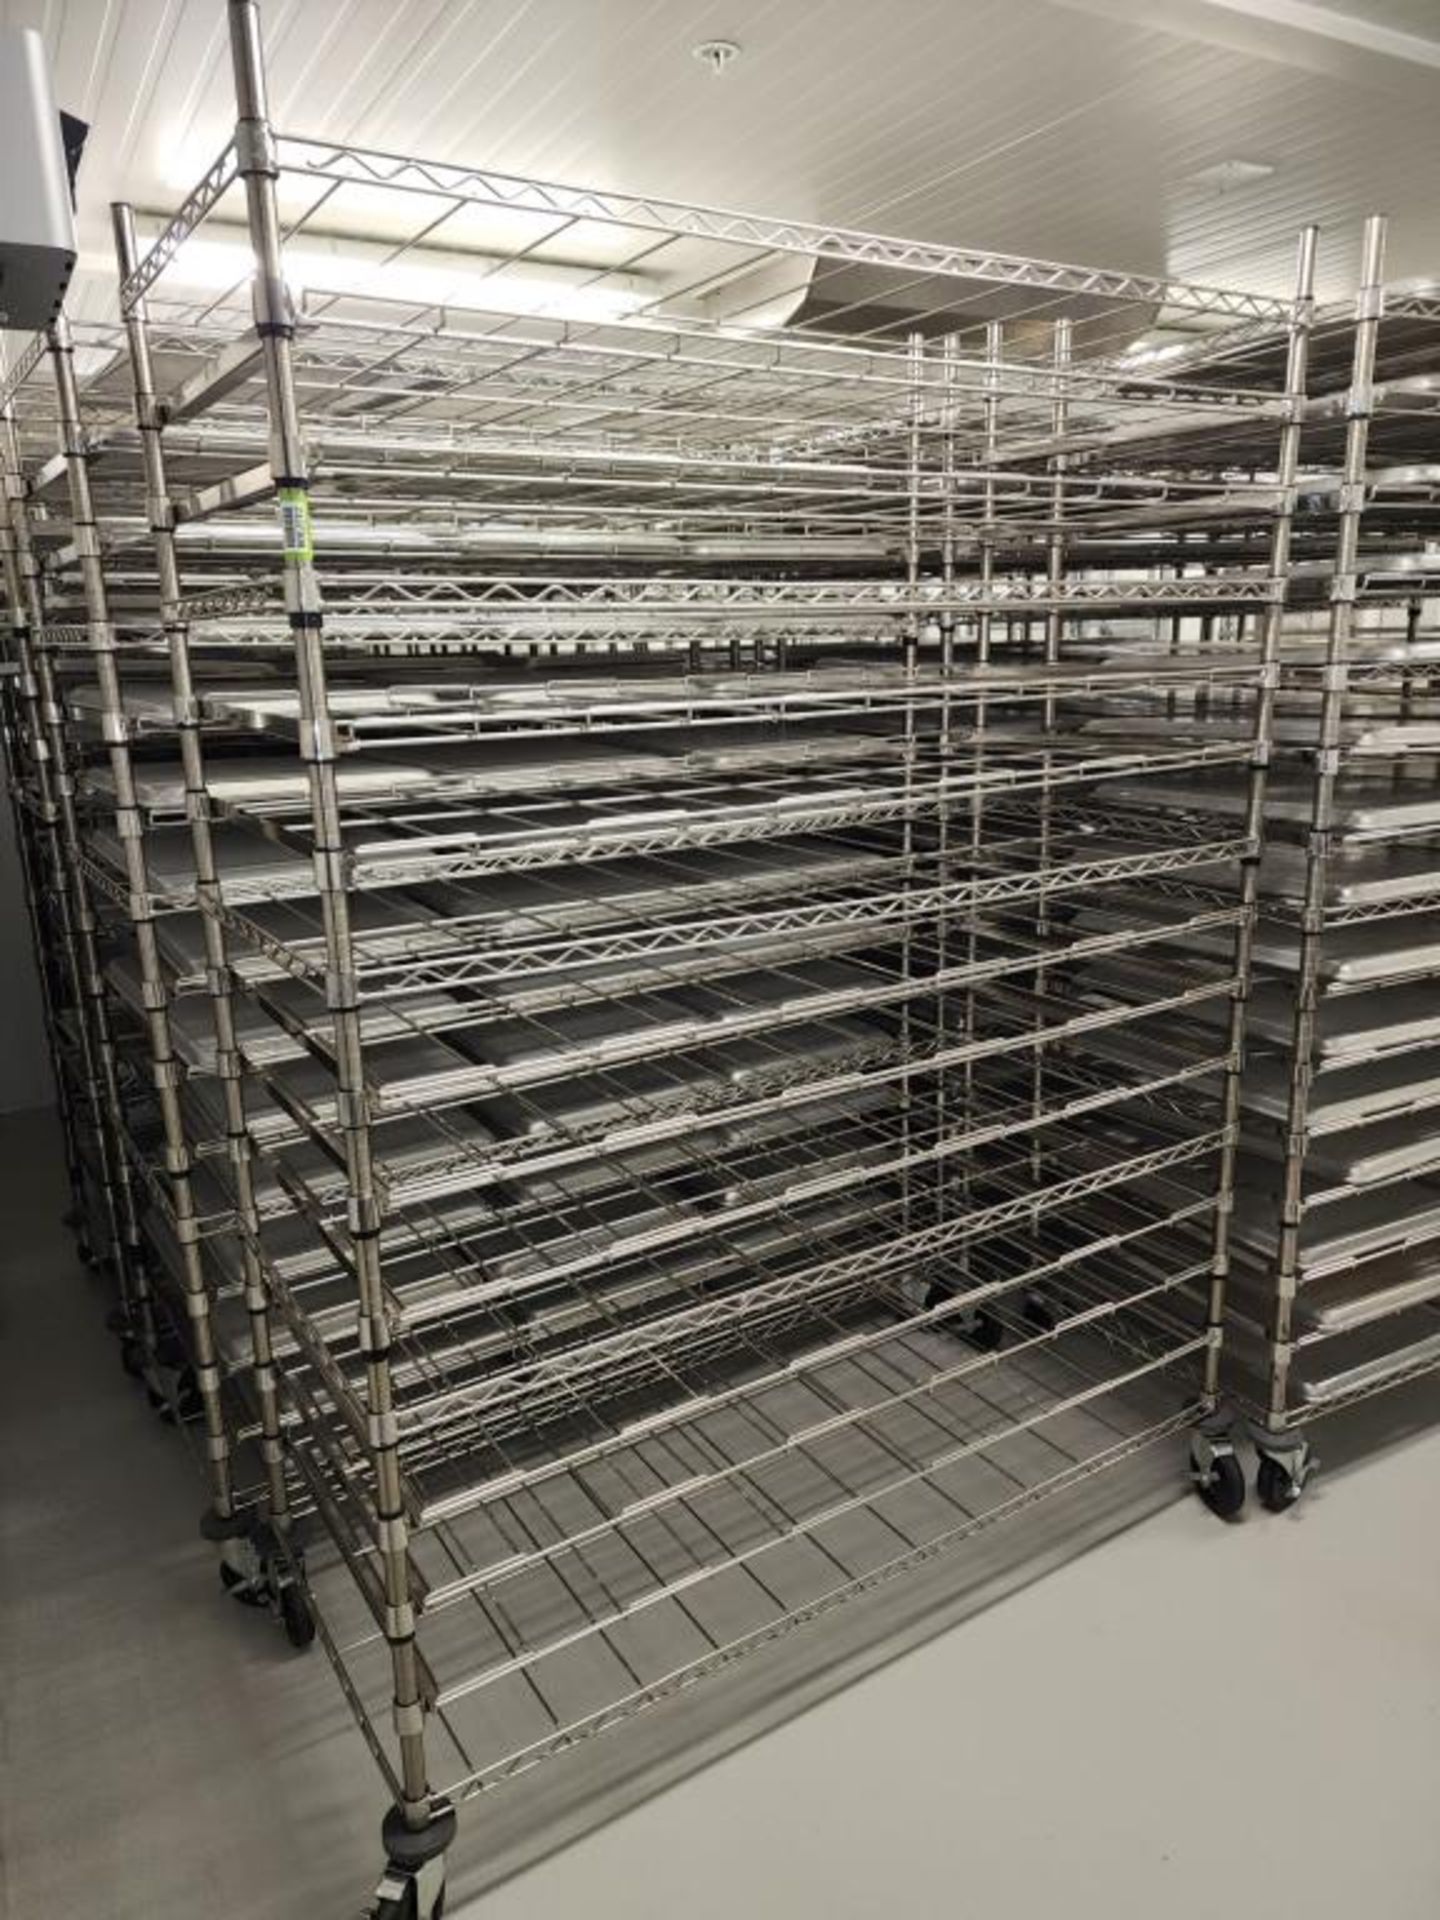 Drying Carts and Trays - Image 3 of 12